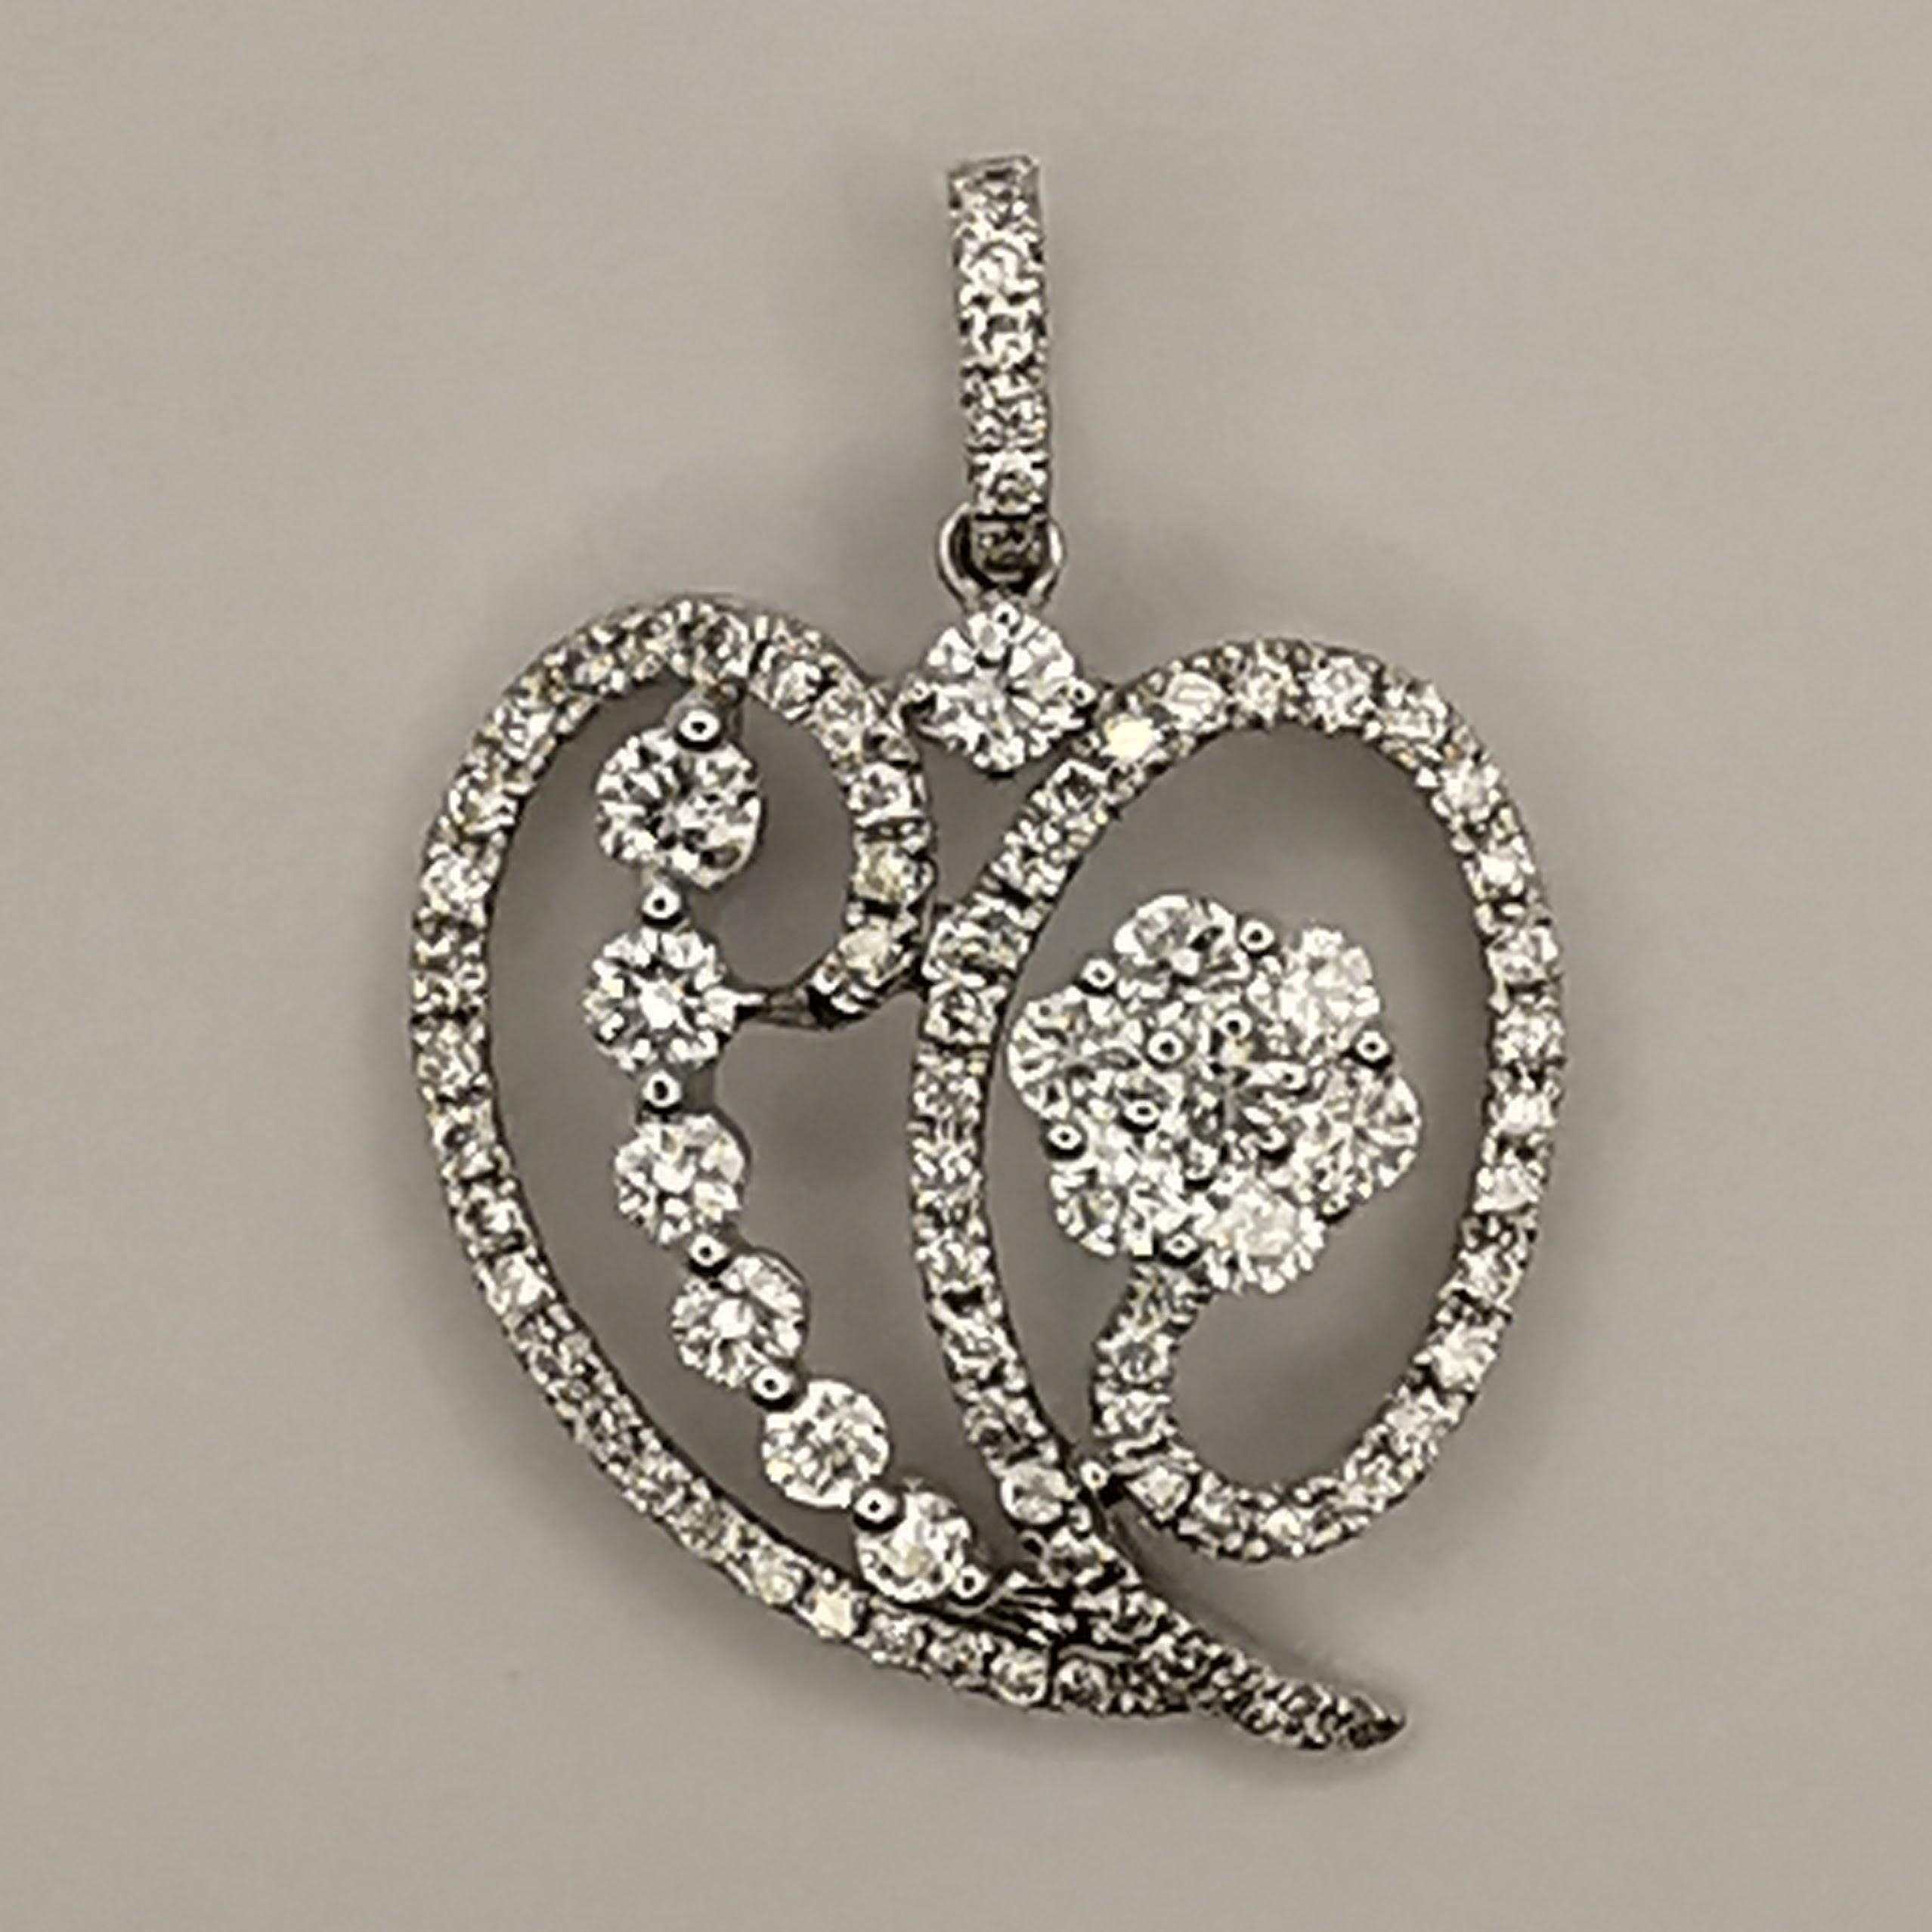 This unique and eye-catching pendant necklace features a heart-shaped bell pepper design set with 0.97 carats of diamonds. The pendant is made of 18K white gold, making it comfortable and easy to wear.

The heart-shaped design and diamonds make this